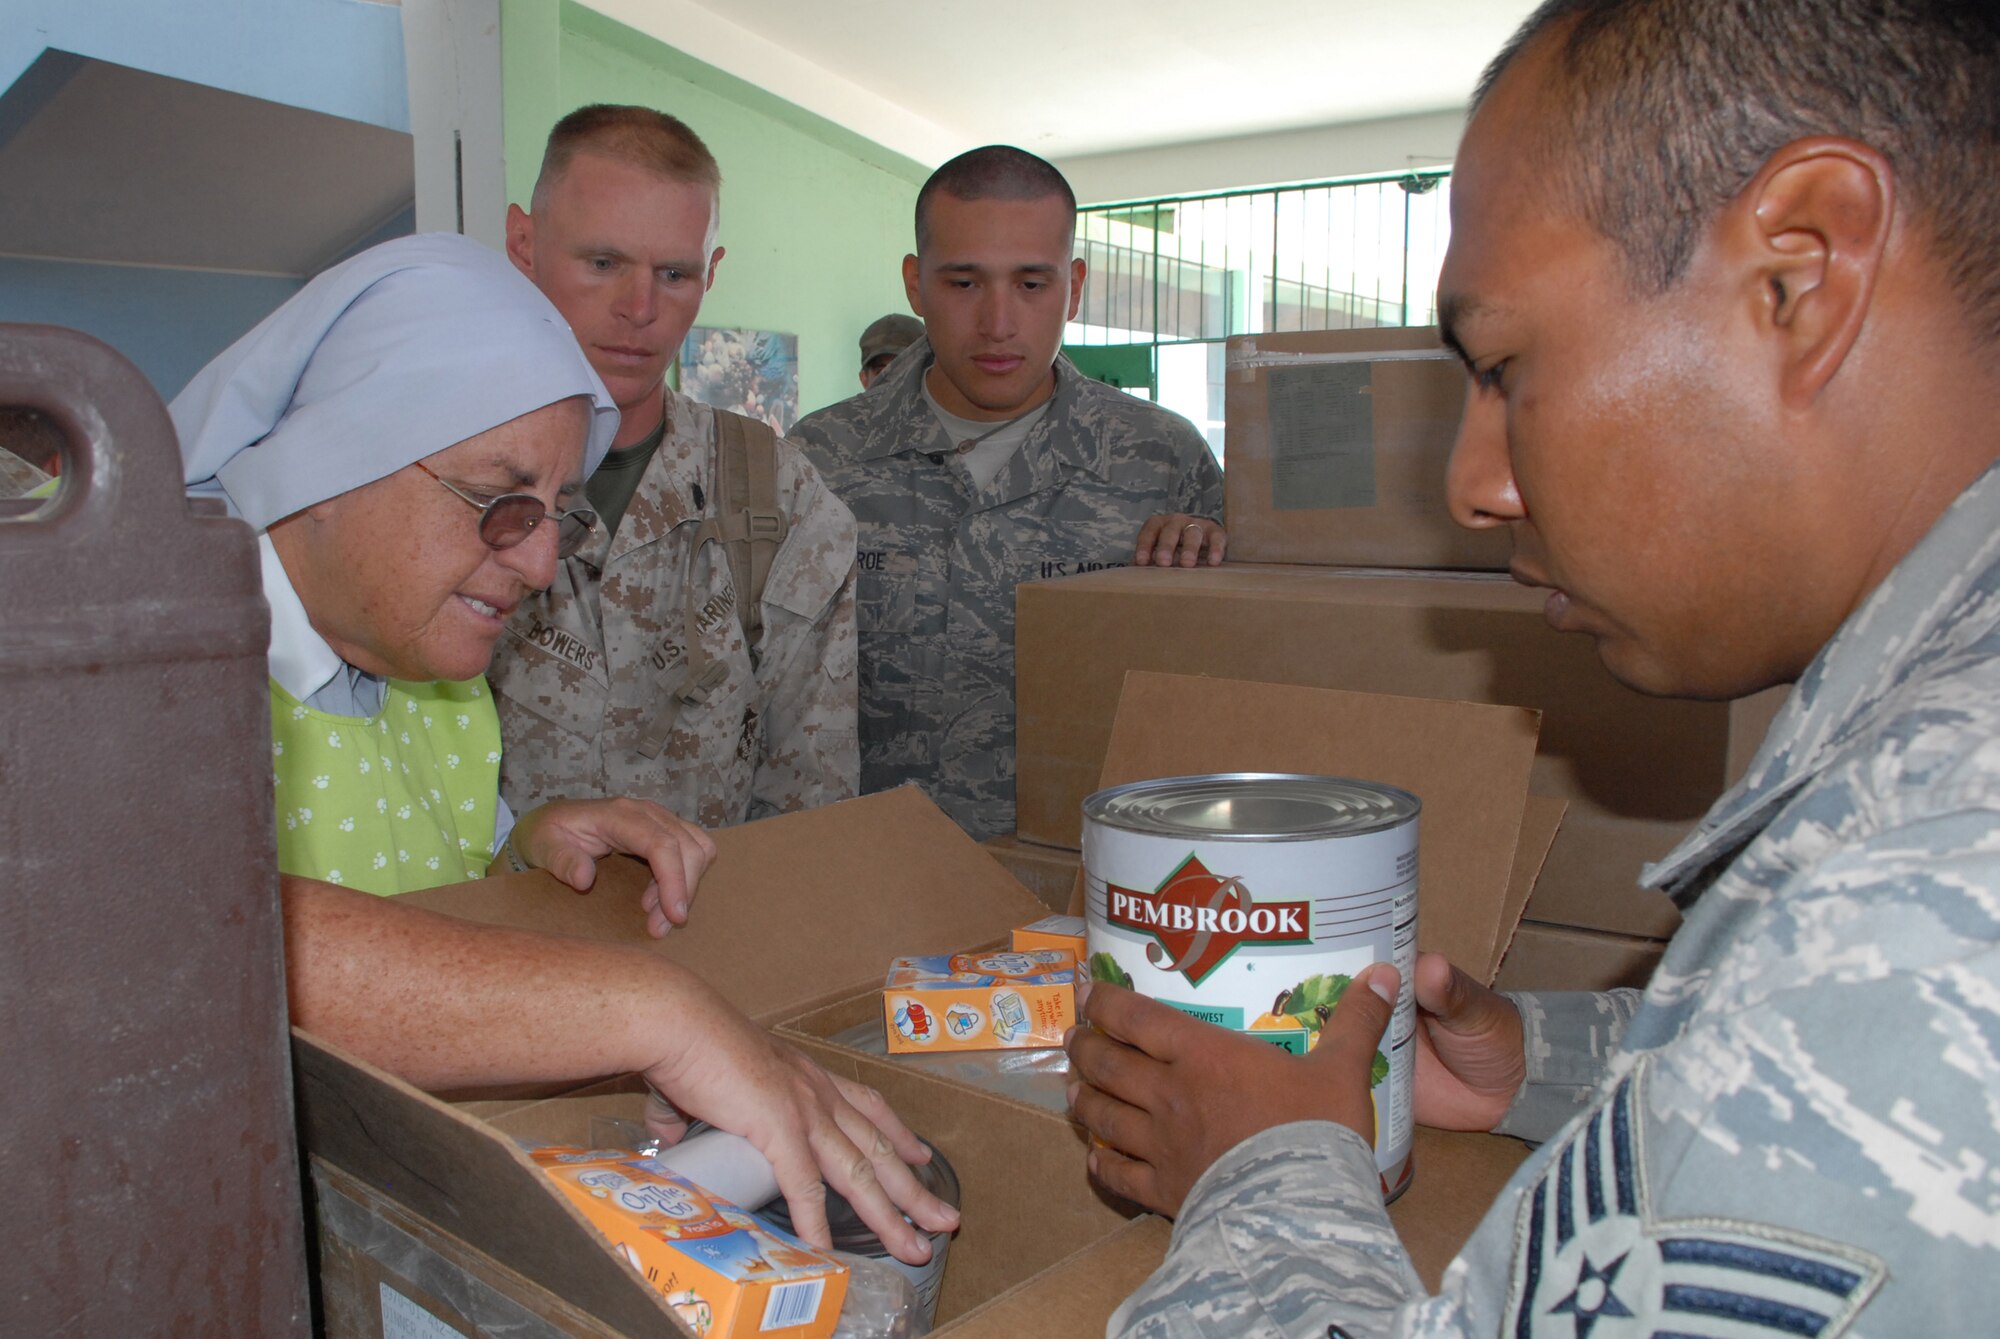 Staff Sgt. Javier Romero, deployed from the 820th Rapid Engineer Deployable Heavy Operation Repair Squadron Engineer (RED HORSE) Squadron at Nellis Air Force Base, Nev., helps Sister Amanda Delgado explore a box of food donated by the U.S. military, June 9, to Juan Andres Vivanco Amorin, a children’s orphanage in Ayacucho, Peru. The orphanage houses 180 boys and girls who will be affected by the support given to New Horizons Peru 2008, a Peruvian and U.S. partnered effort to build schools, clinics, and wells for the Peruvian people. (U.S. Air Force photo/Airman 1st Class Tracie Forte)